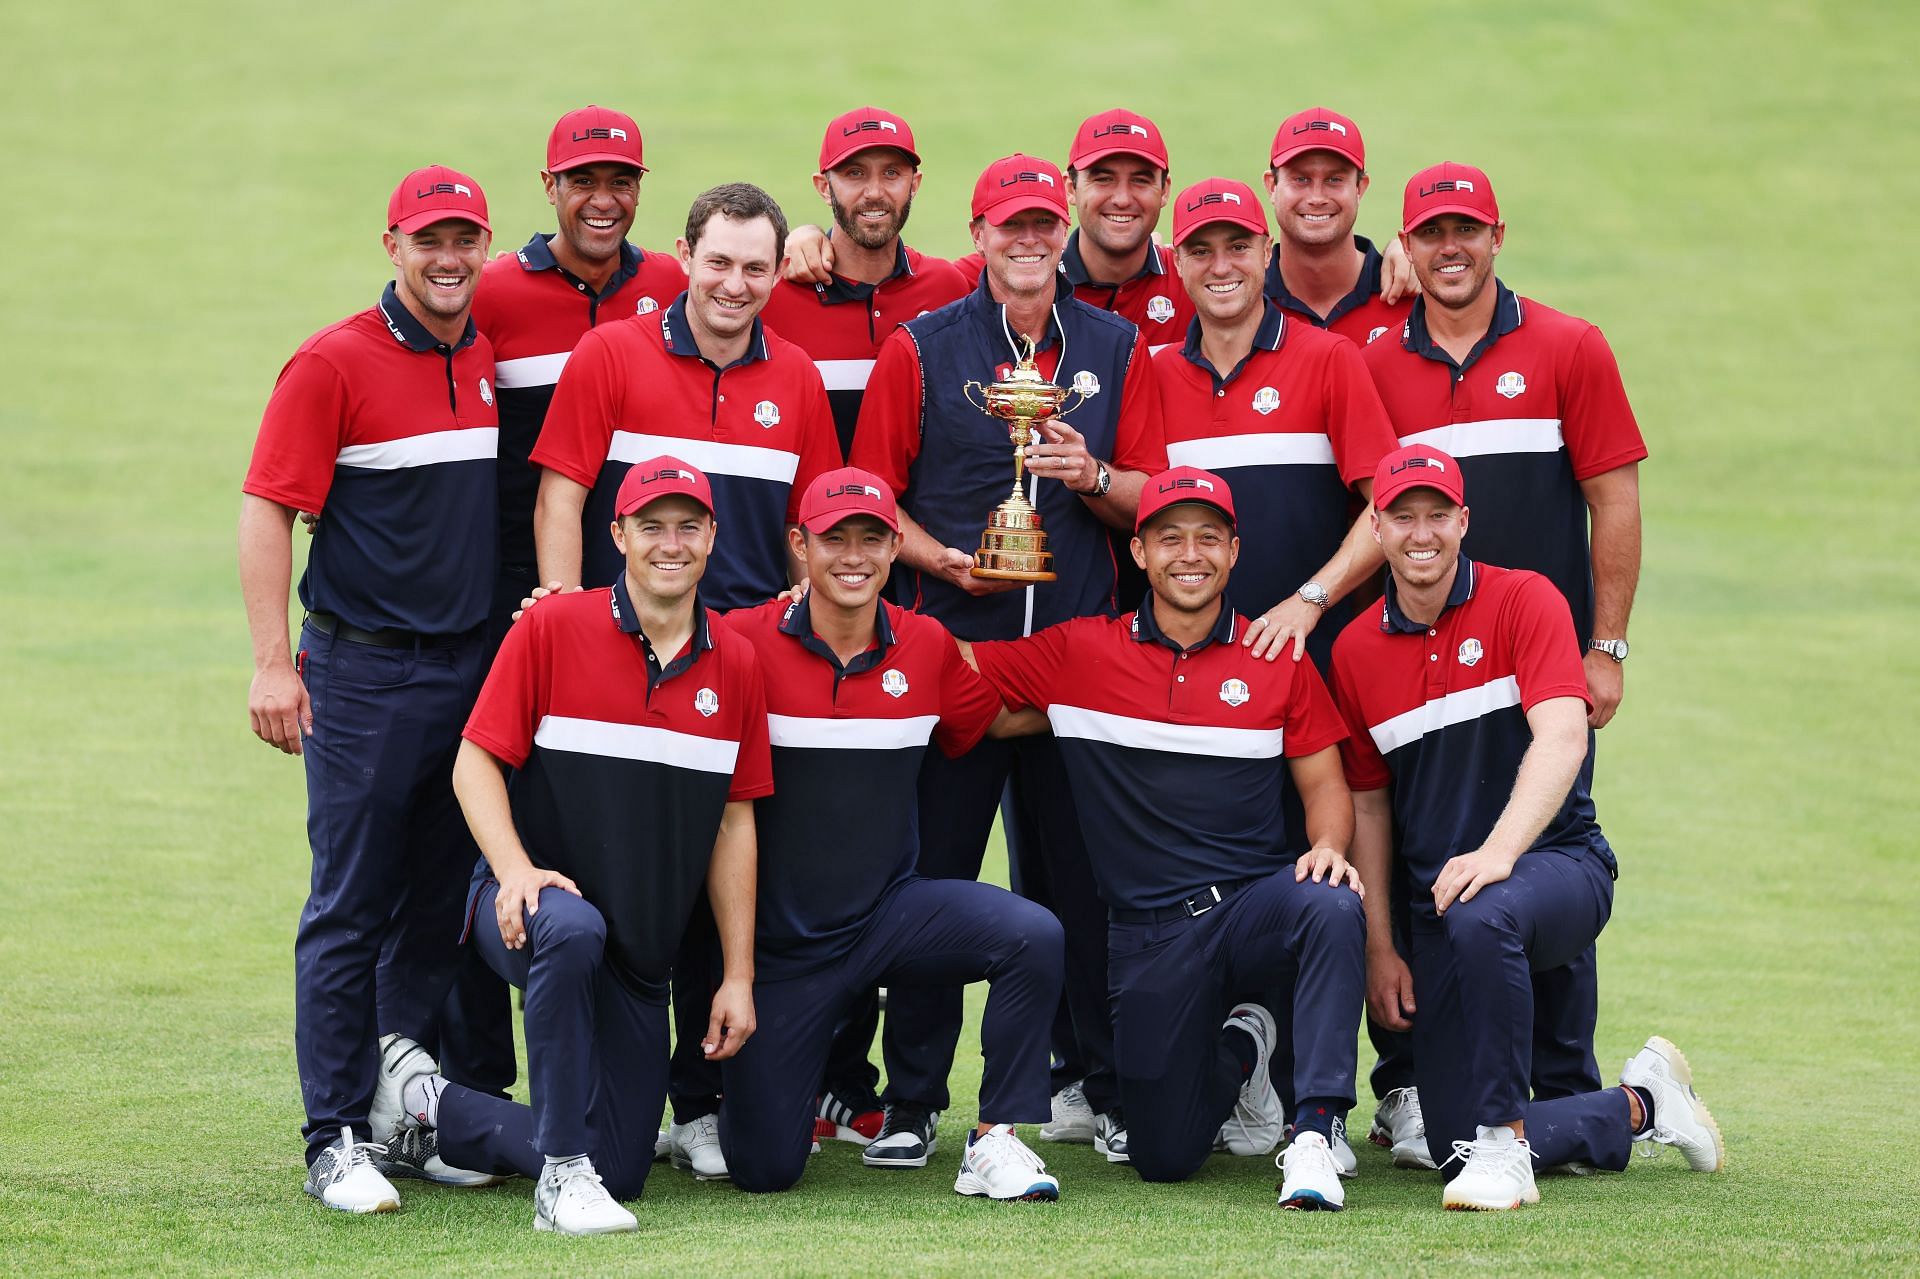 The United States won the 43rd Ryder Cup in 2021